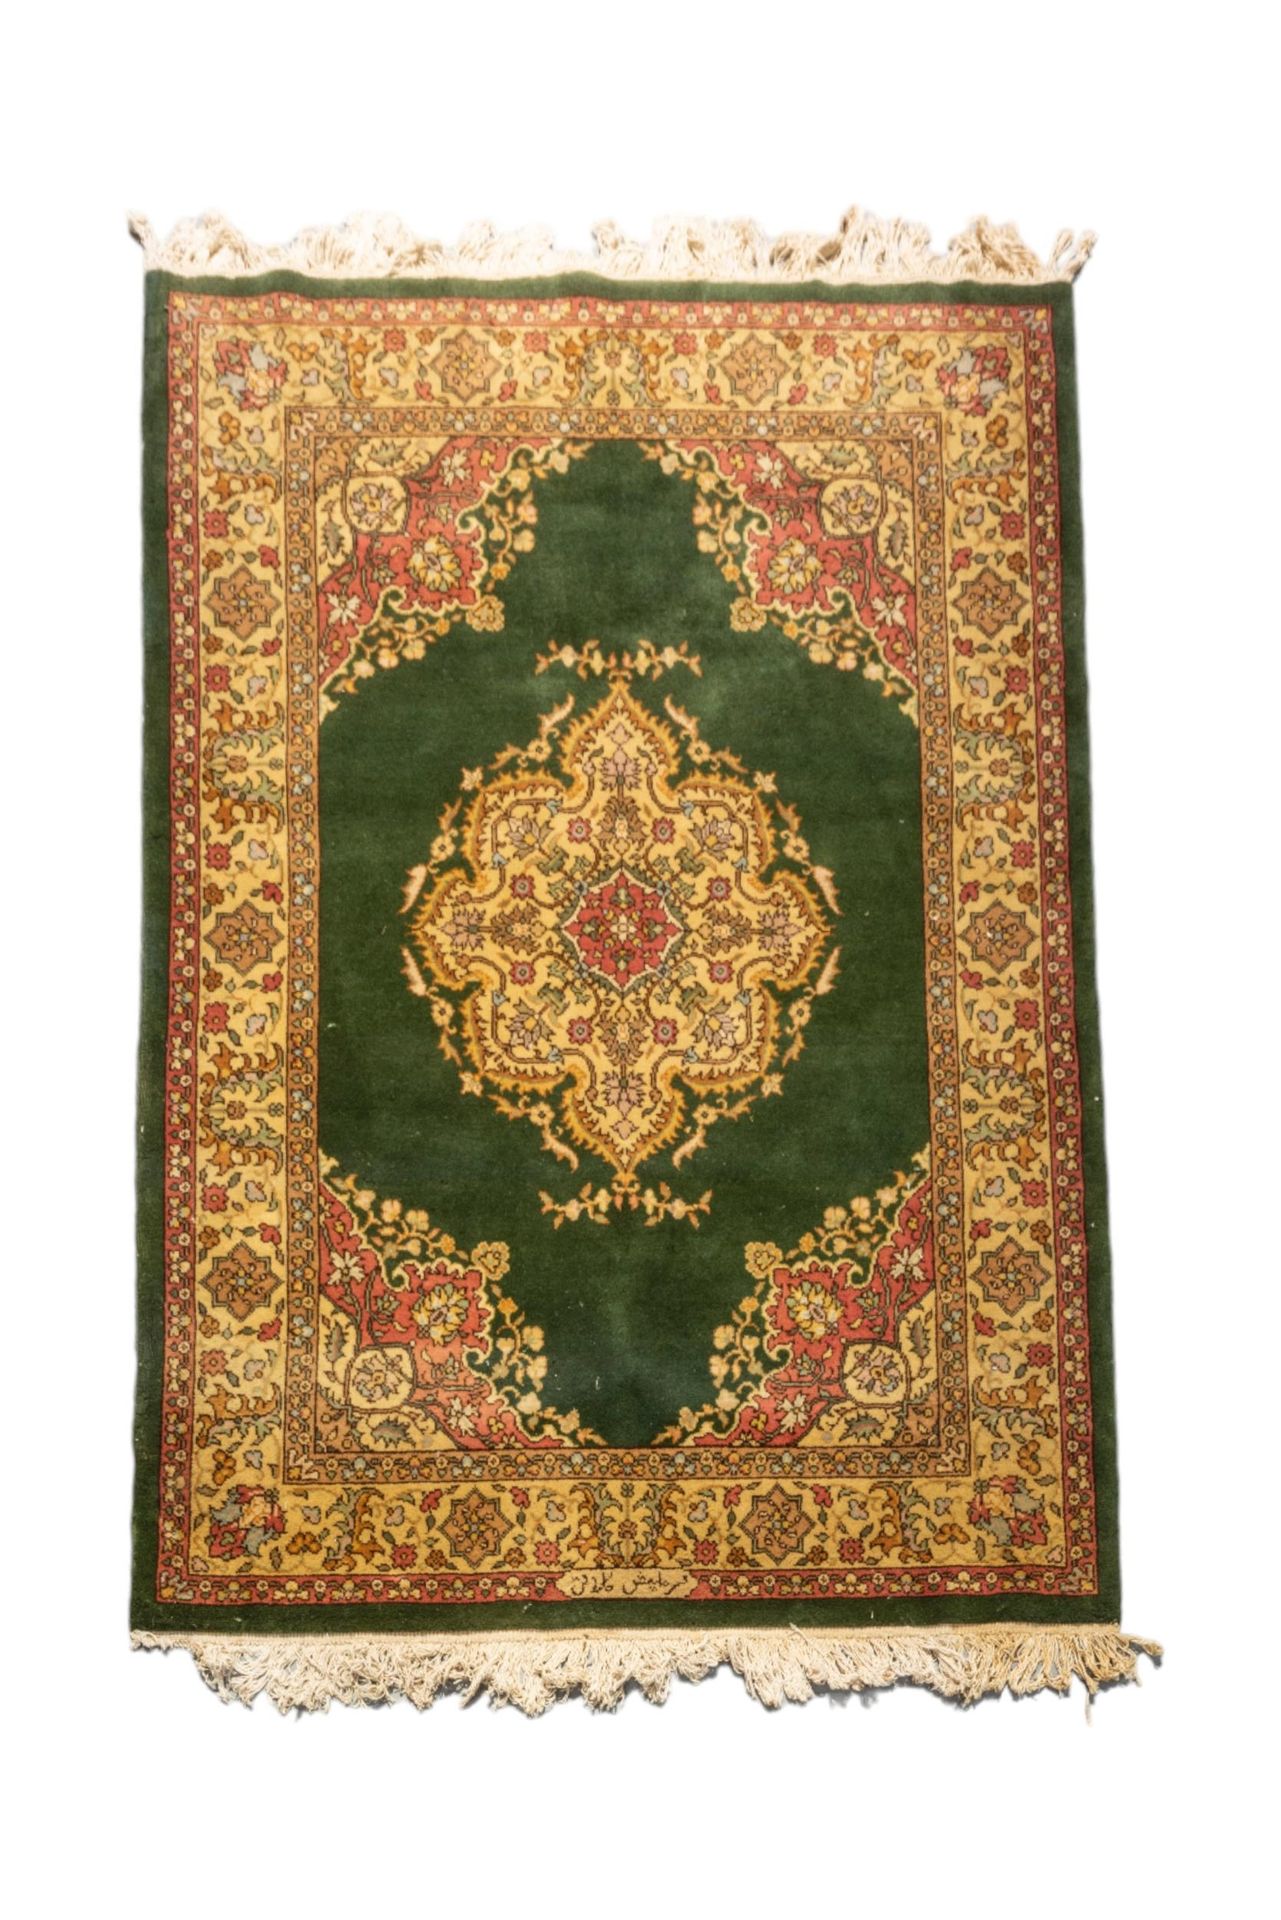 Null A HAND KNOTTED SIGNED PERSIAN RUG, LATE 20TH CENTURY, 205 x 142 cm